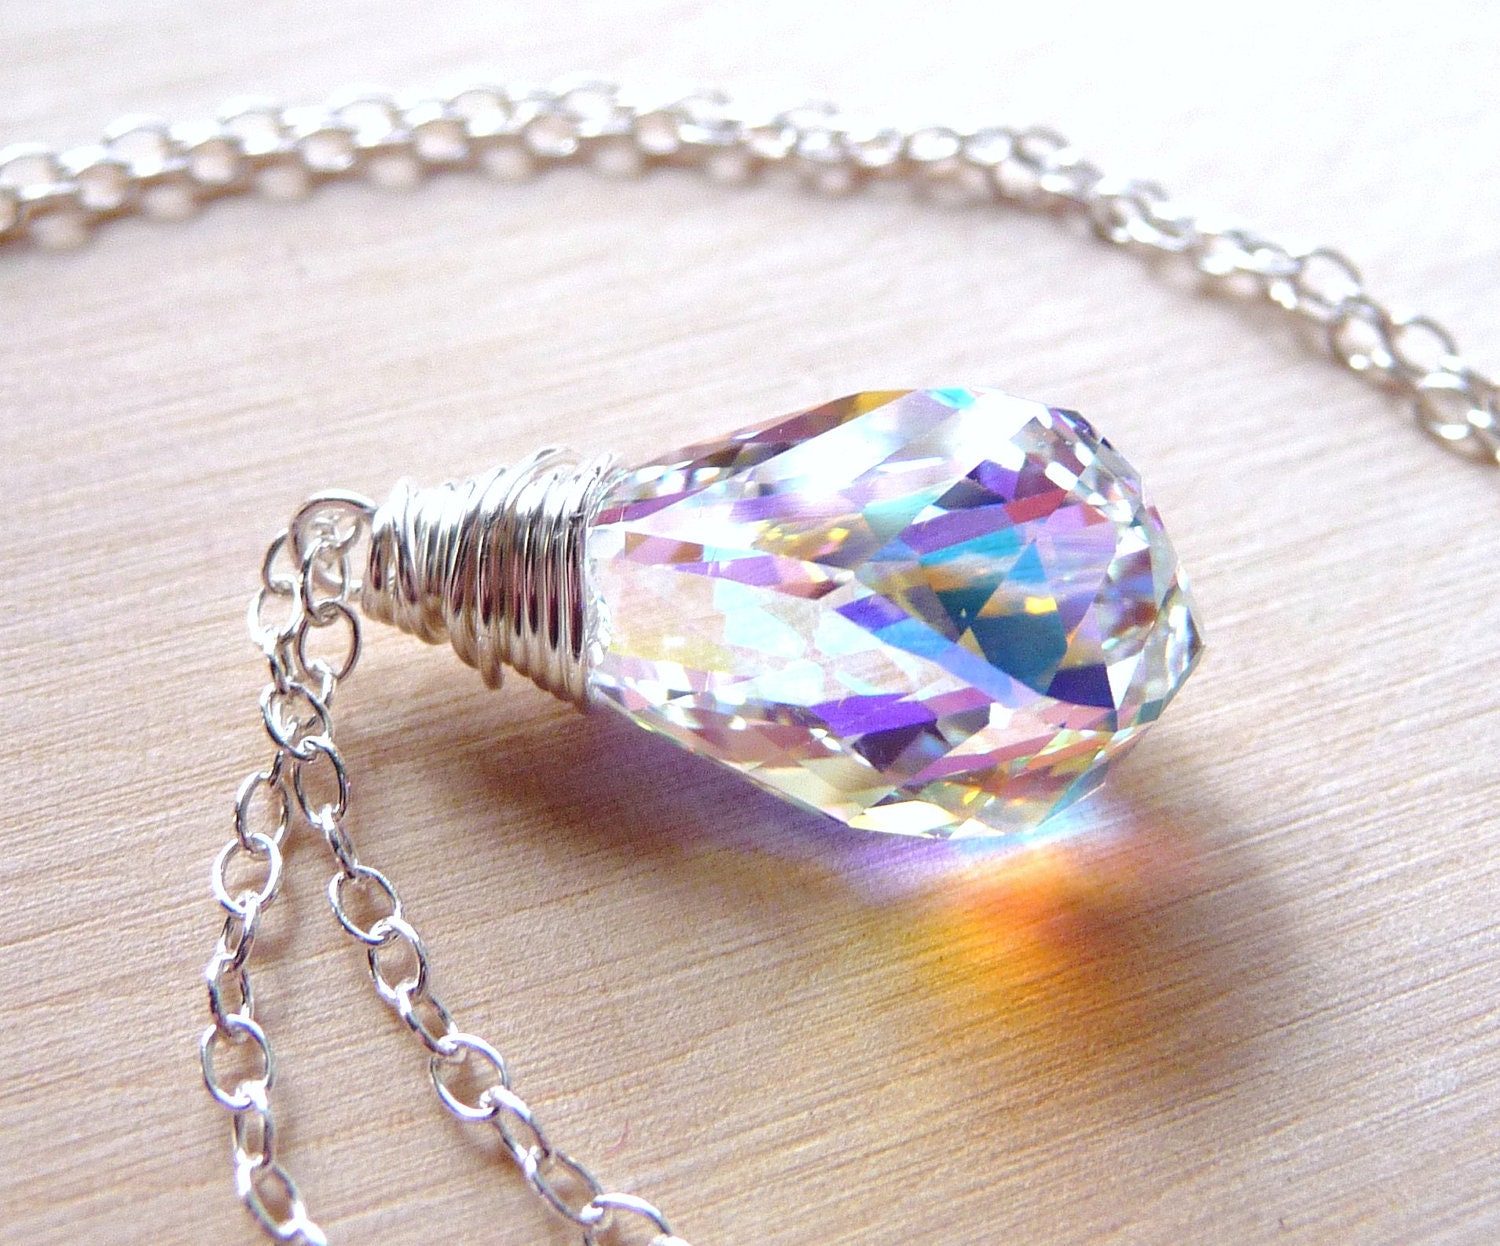 Swarovski Aurora Borealis Crystal Necklace, Wire Wrapped Glass Helix Teardrop, Sterling Silver Necklace, Under 50 Fashion For Women